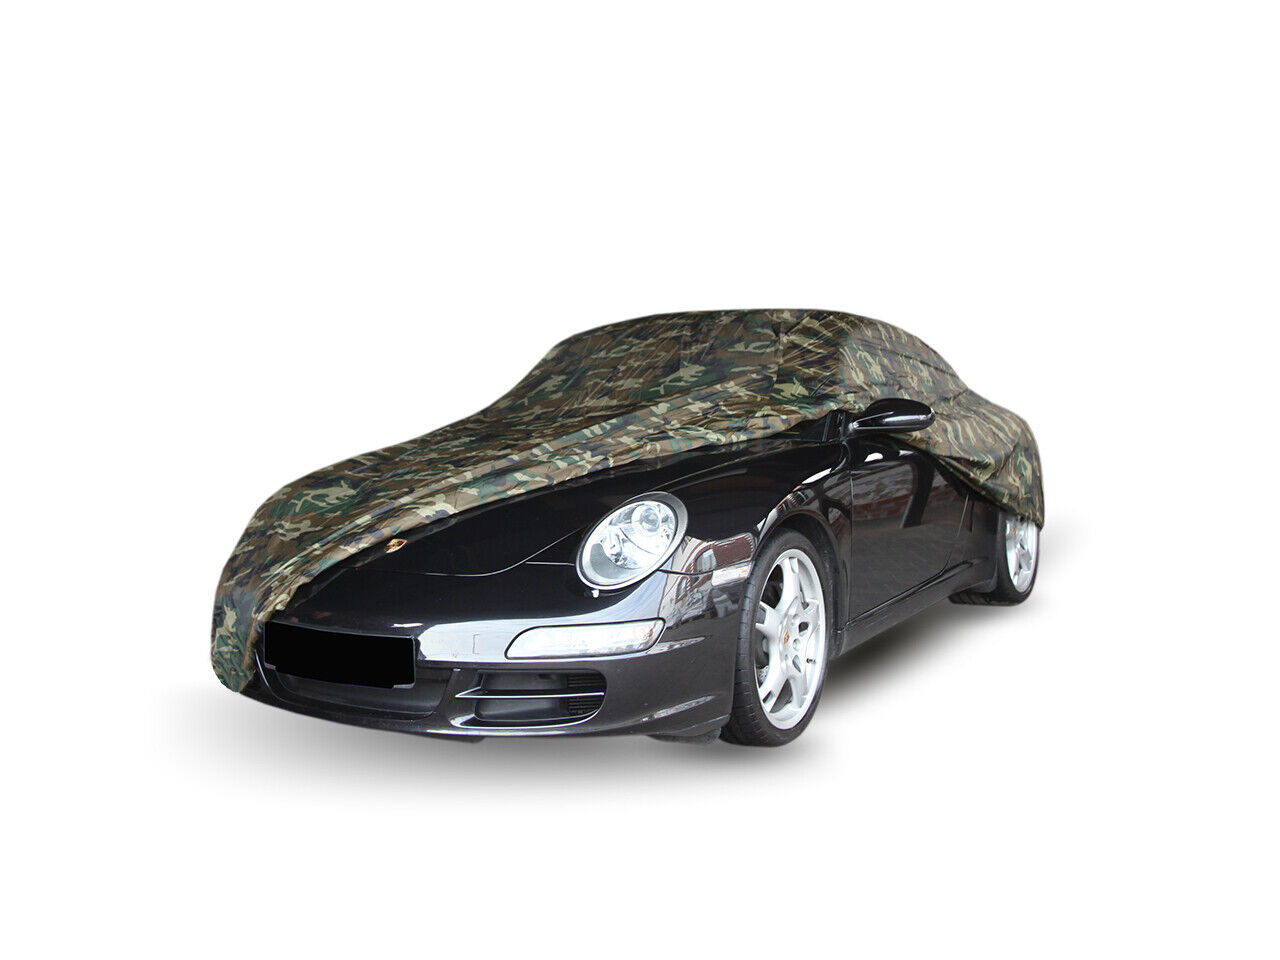 Camouflage protective cover tub fits Wiesmann GT MF4